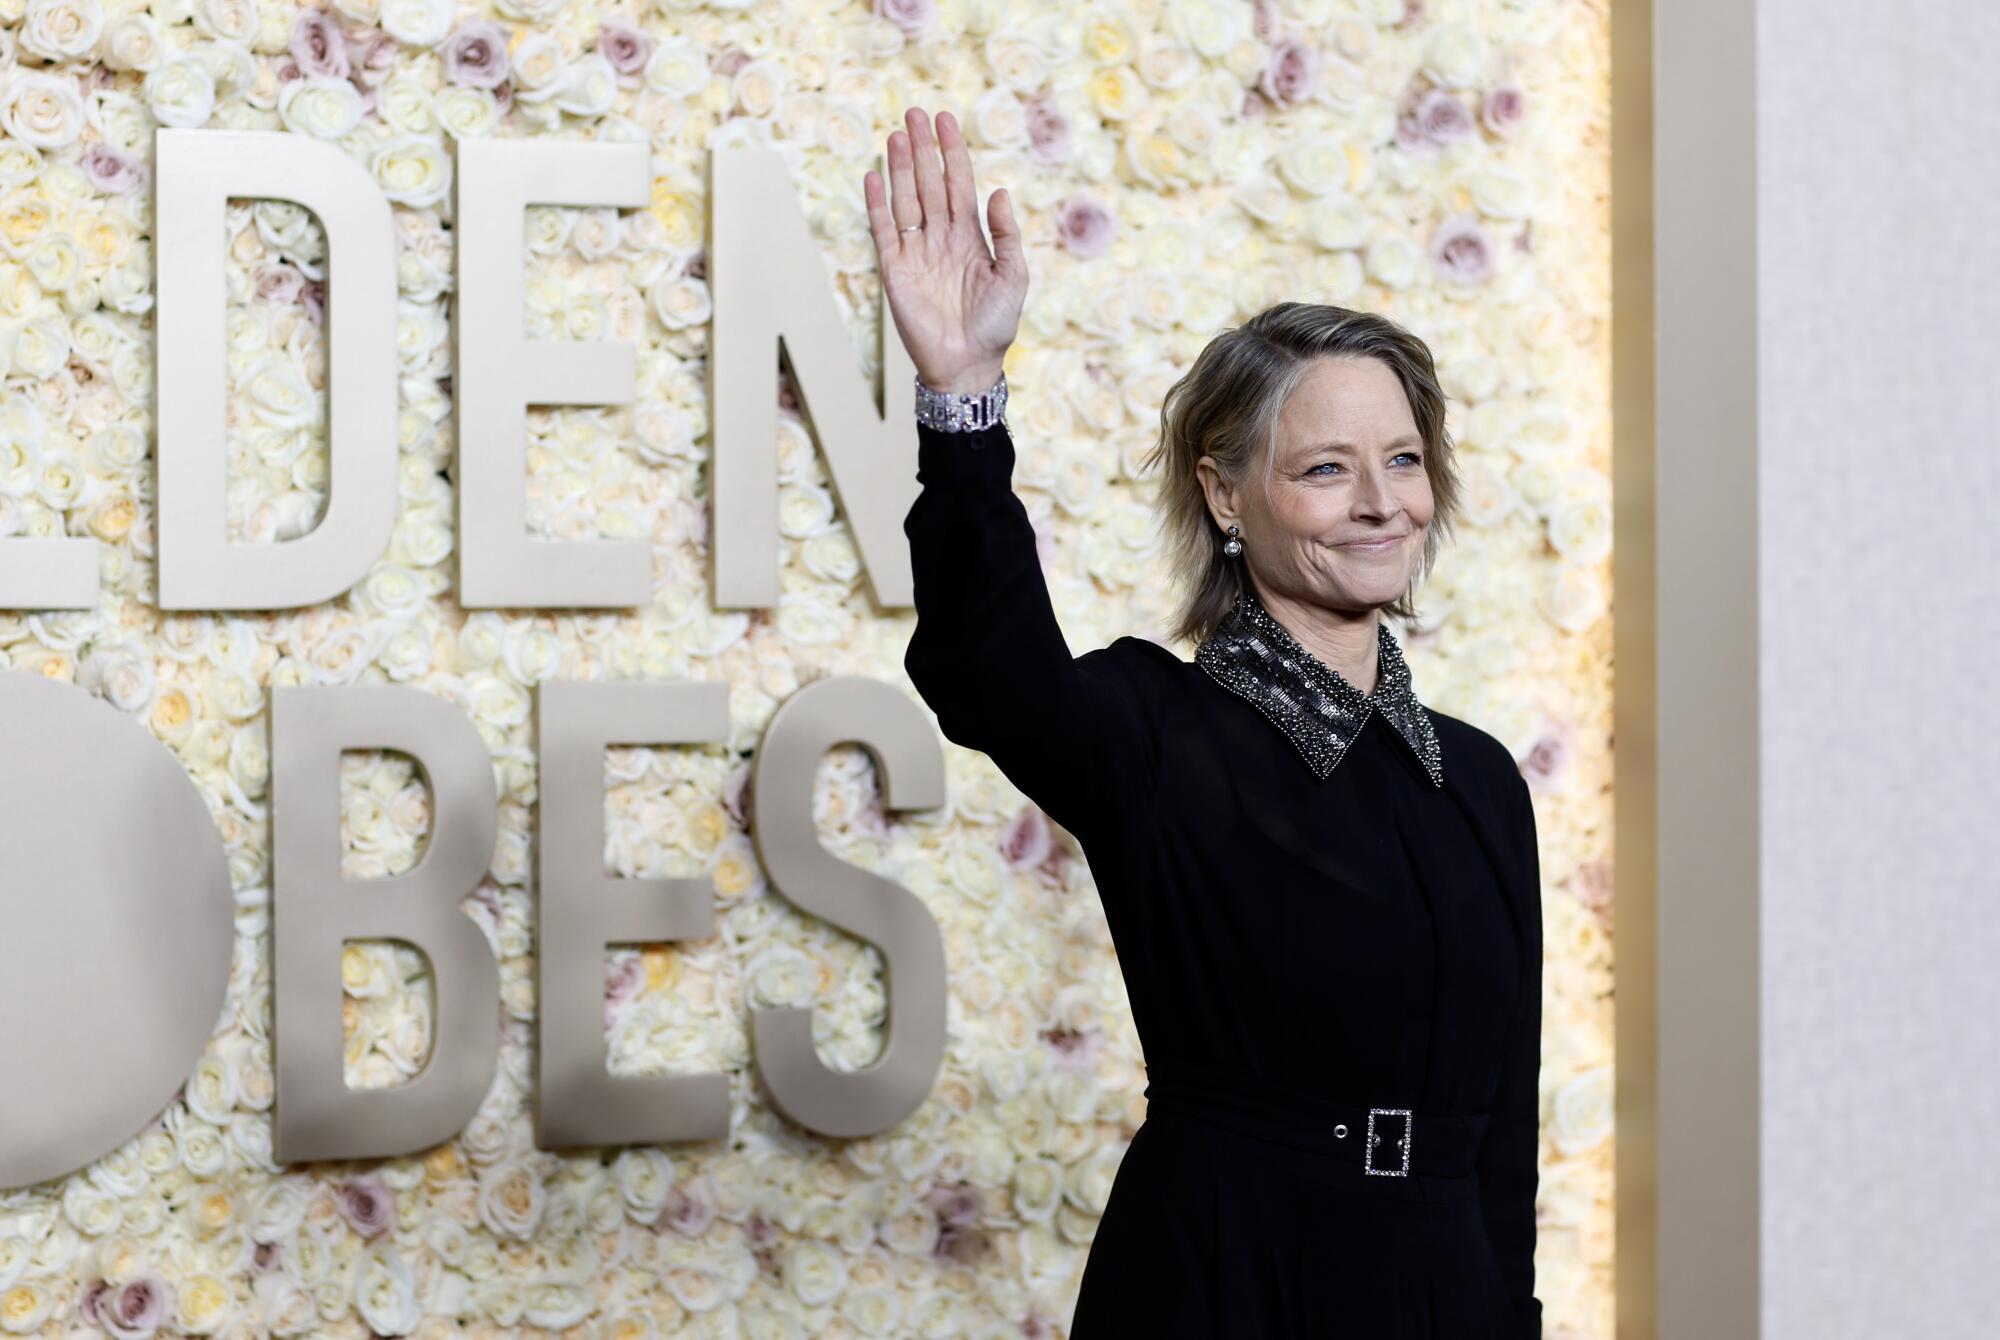 Jodie Foster on the red carpet of the 81st Annual Golden Globe Awards held at the Beverly Hilton Hotel.